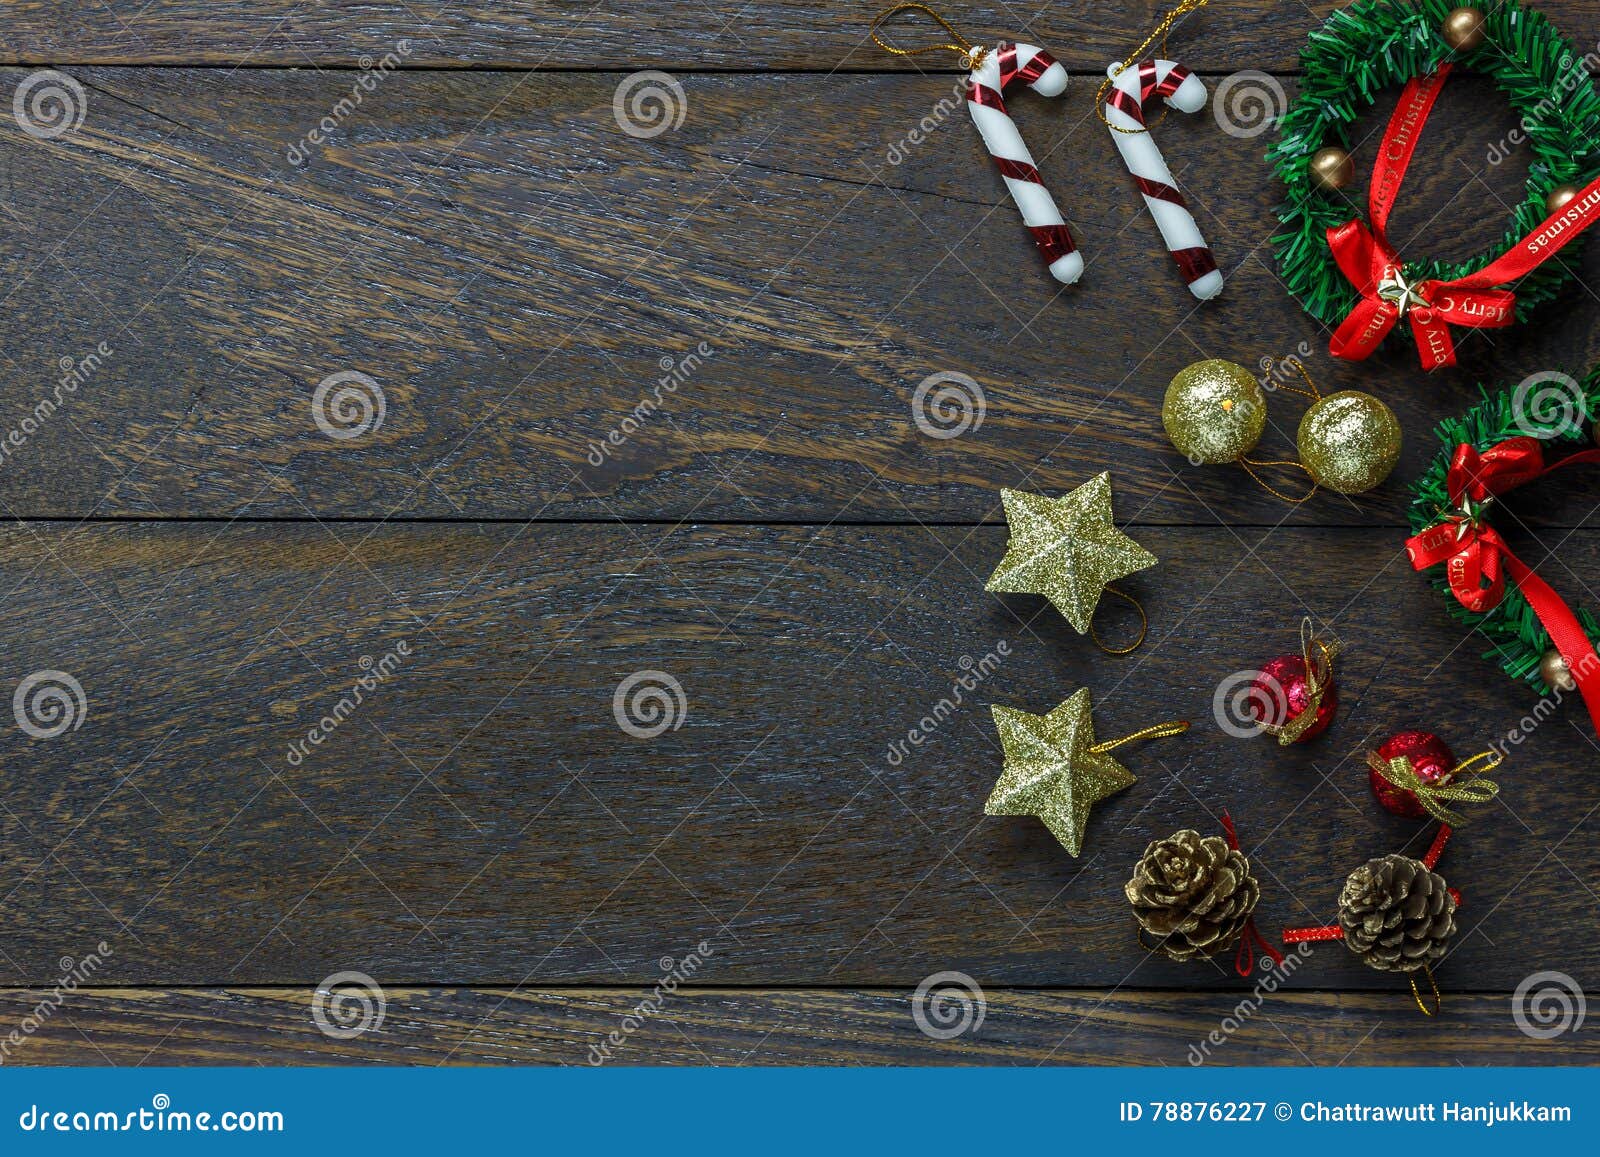 Chrismas Decoration and Ornament on Wooden Background W Stock Image ...